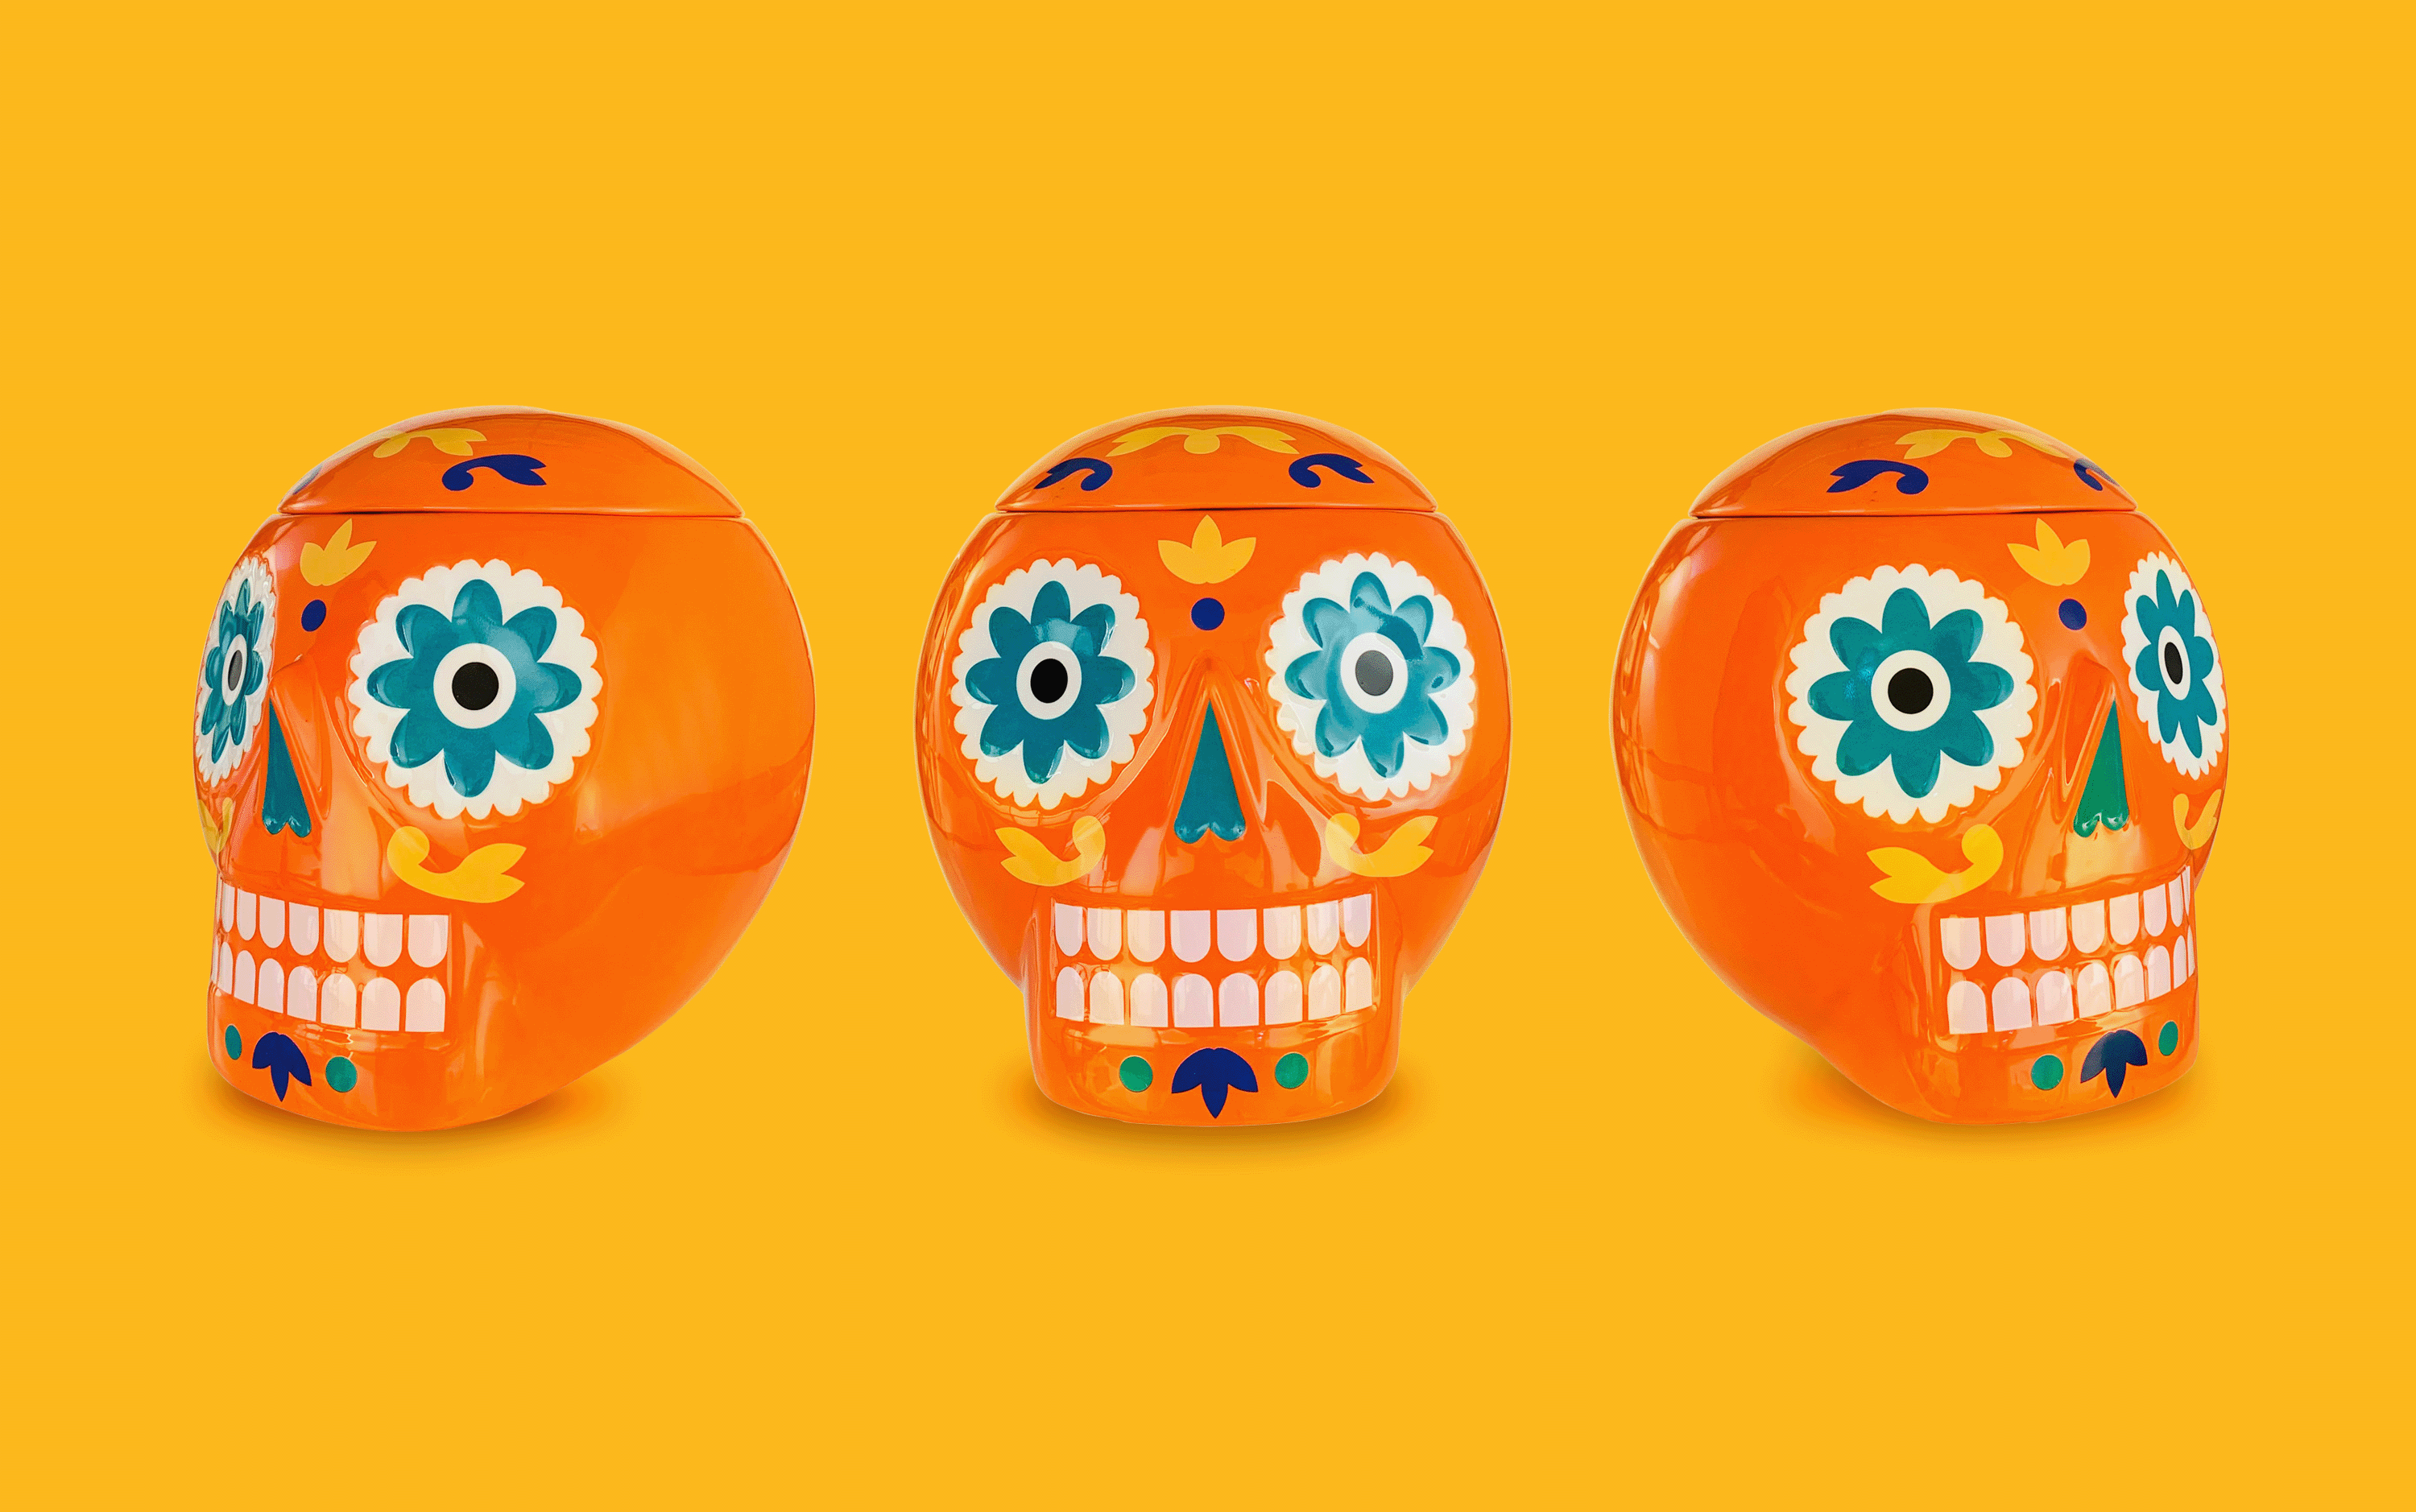 Target Day of the dead product design